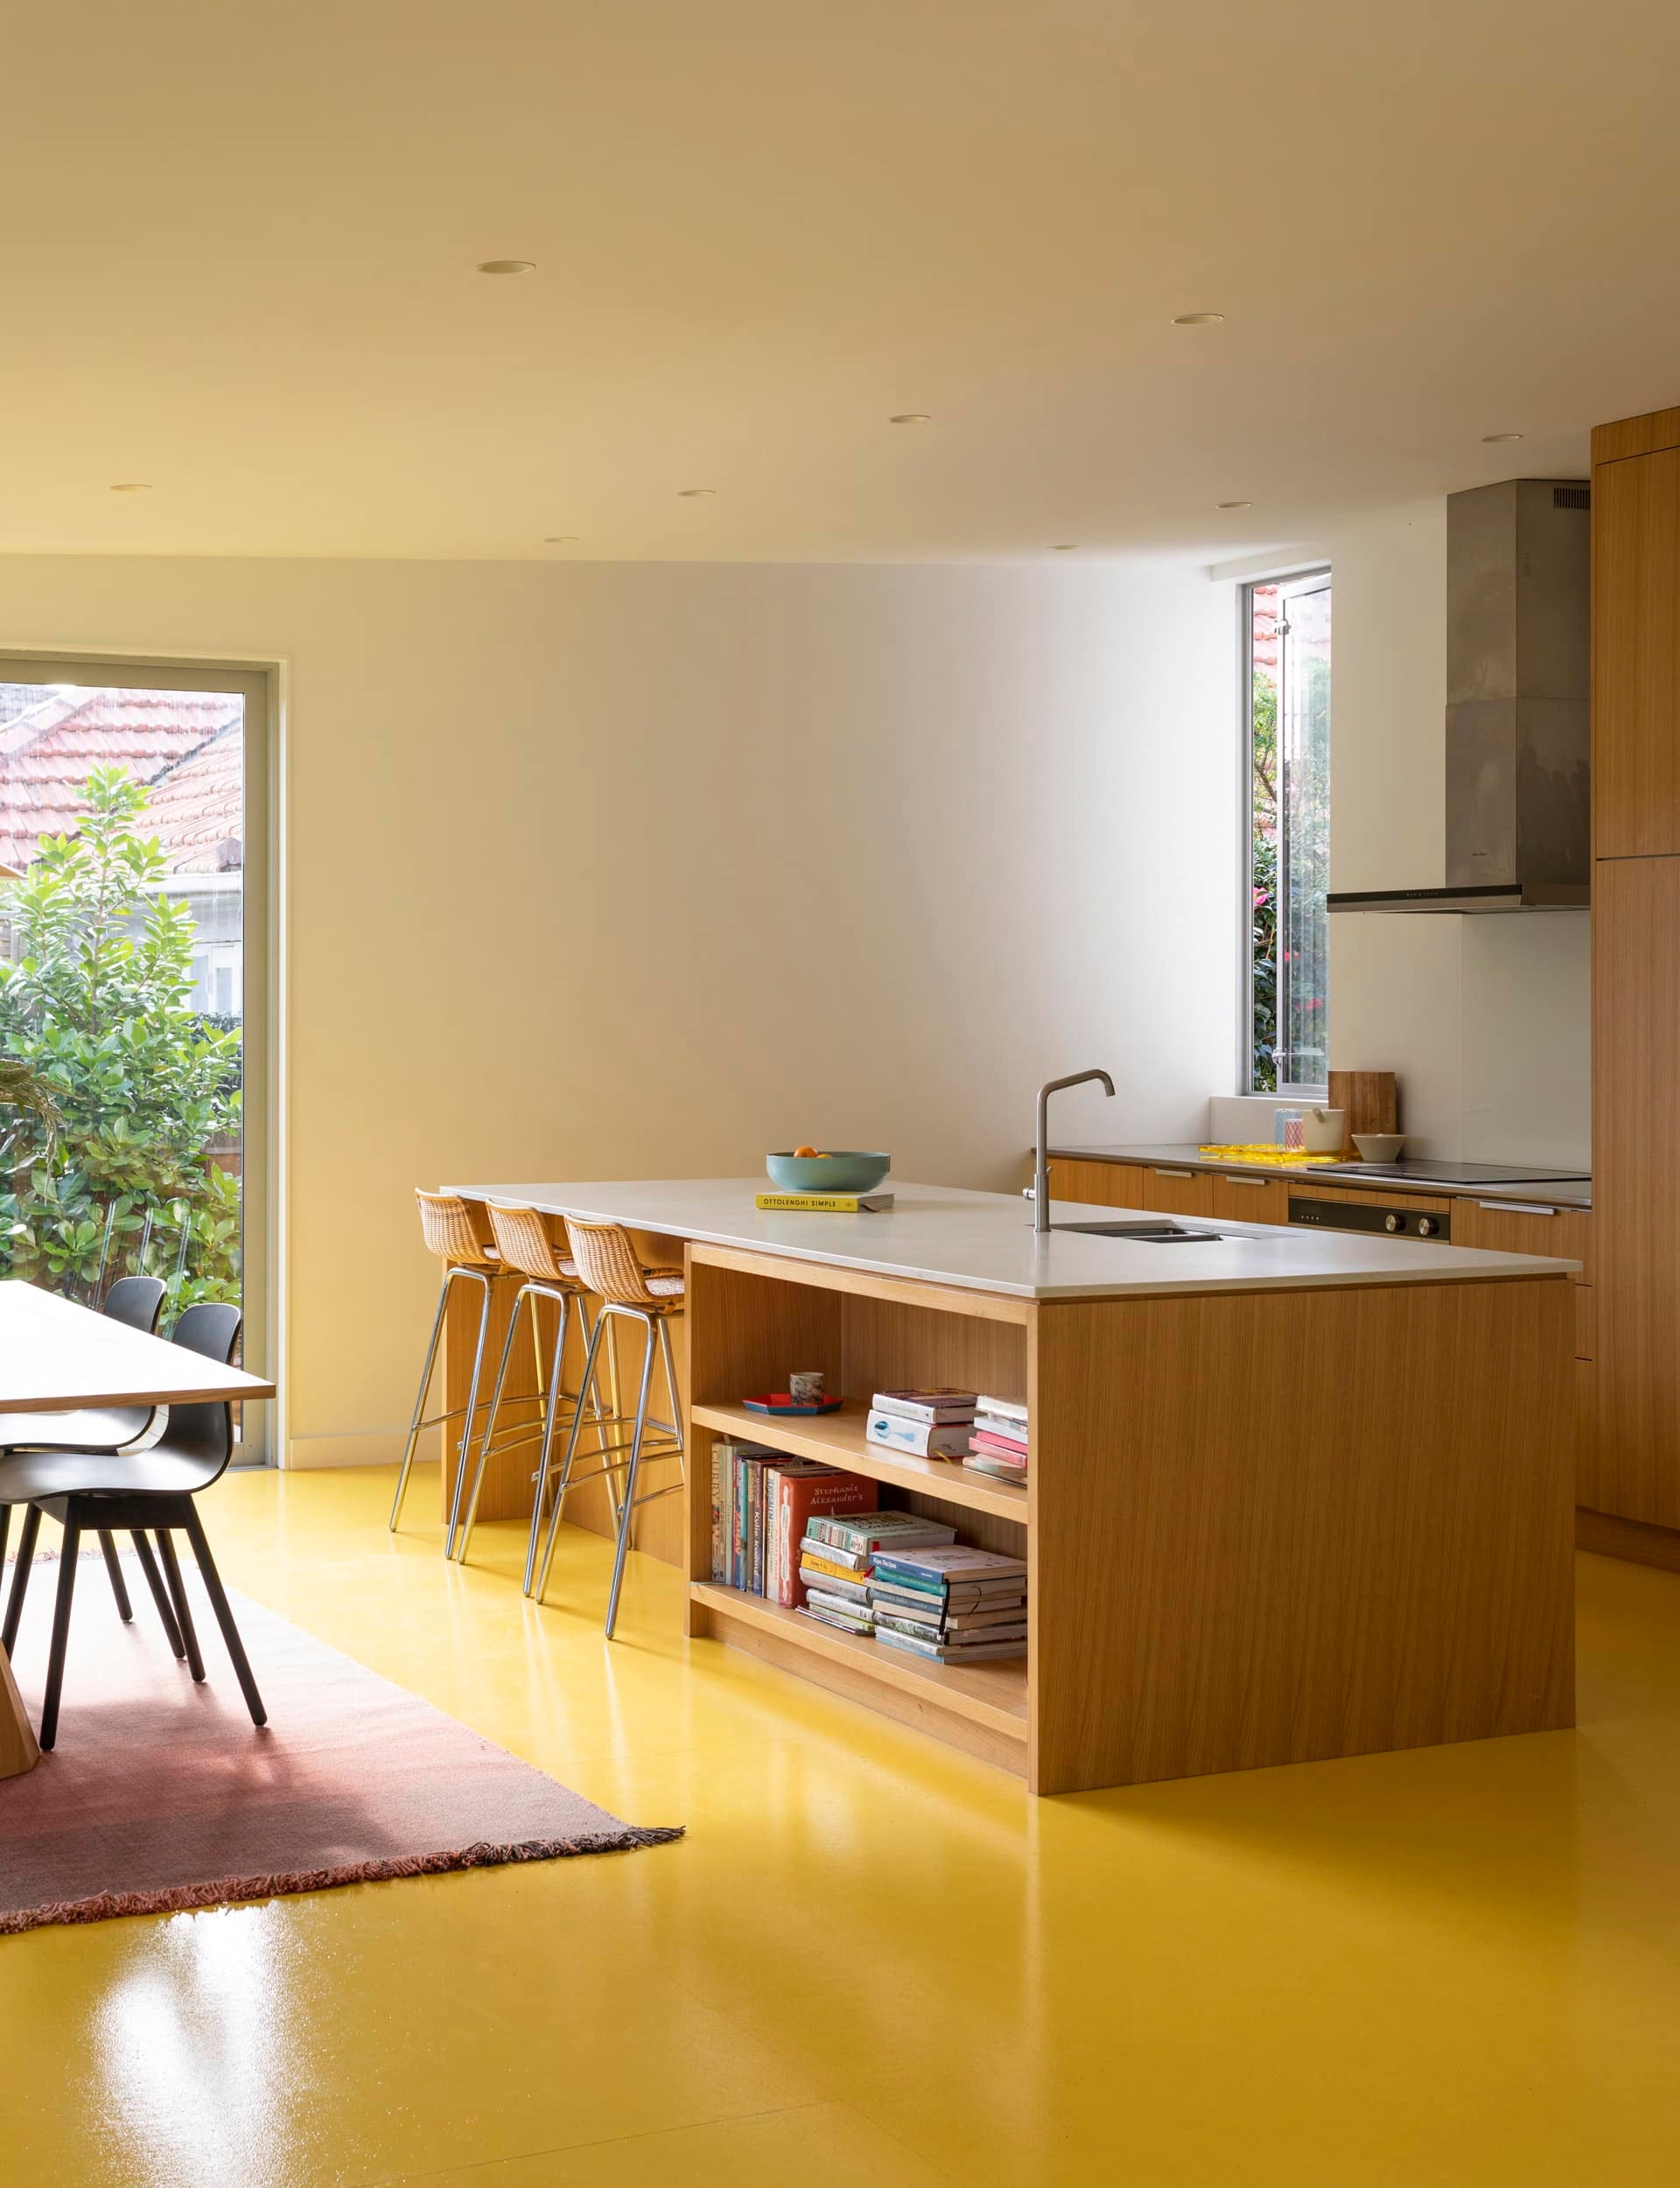 Small but modern kitchen with yellow floors and an island with a small built in bookshelf